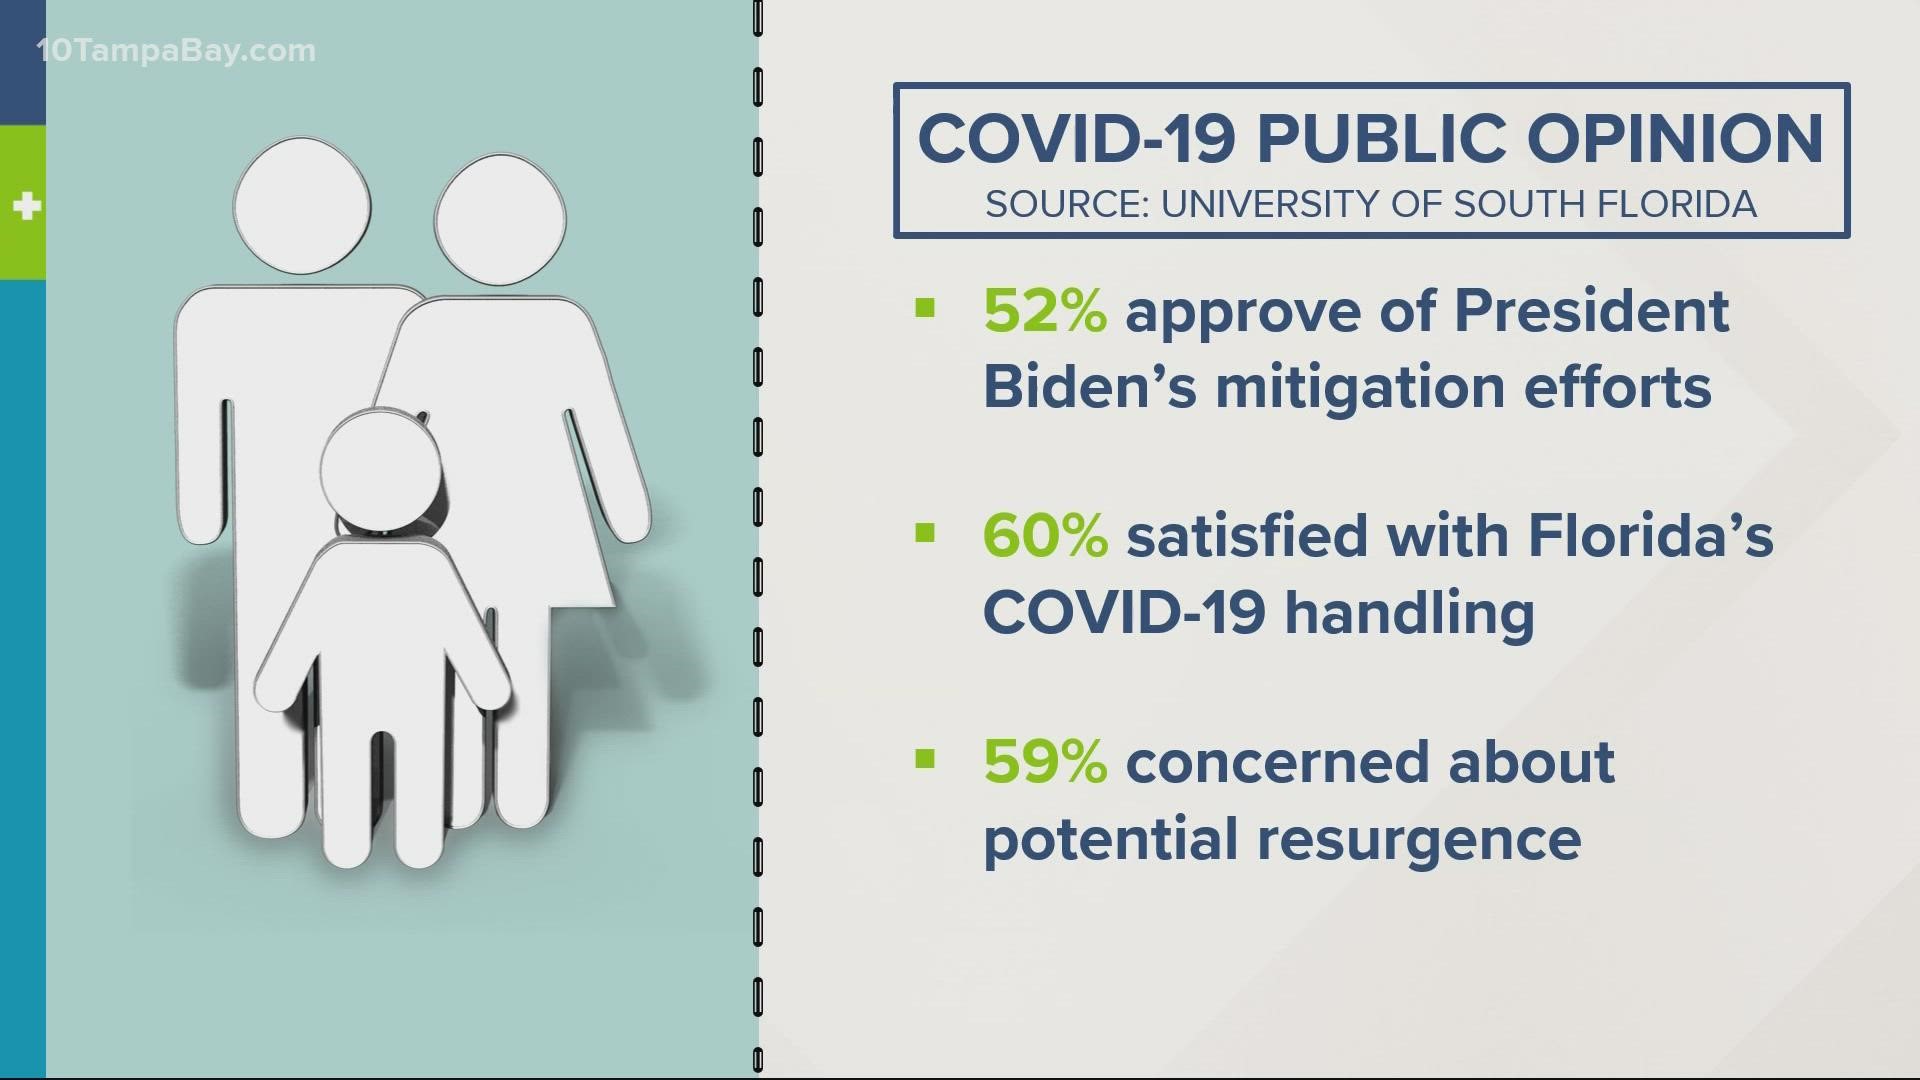 Sixty percent of Floridians say they are either "somewhat" or "very" satisfied with the state's job handling COVID-19.